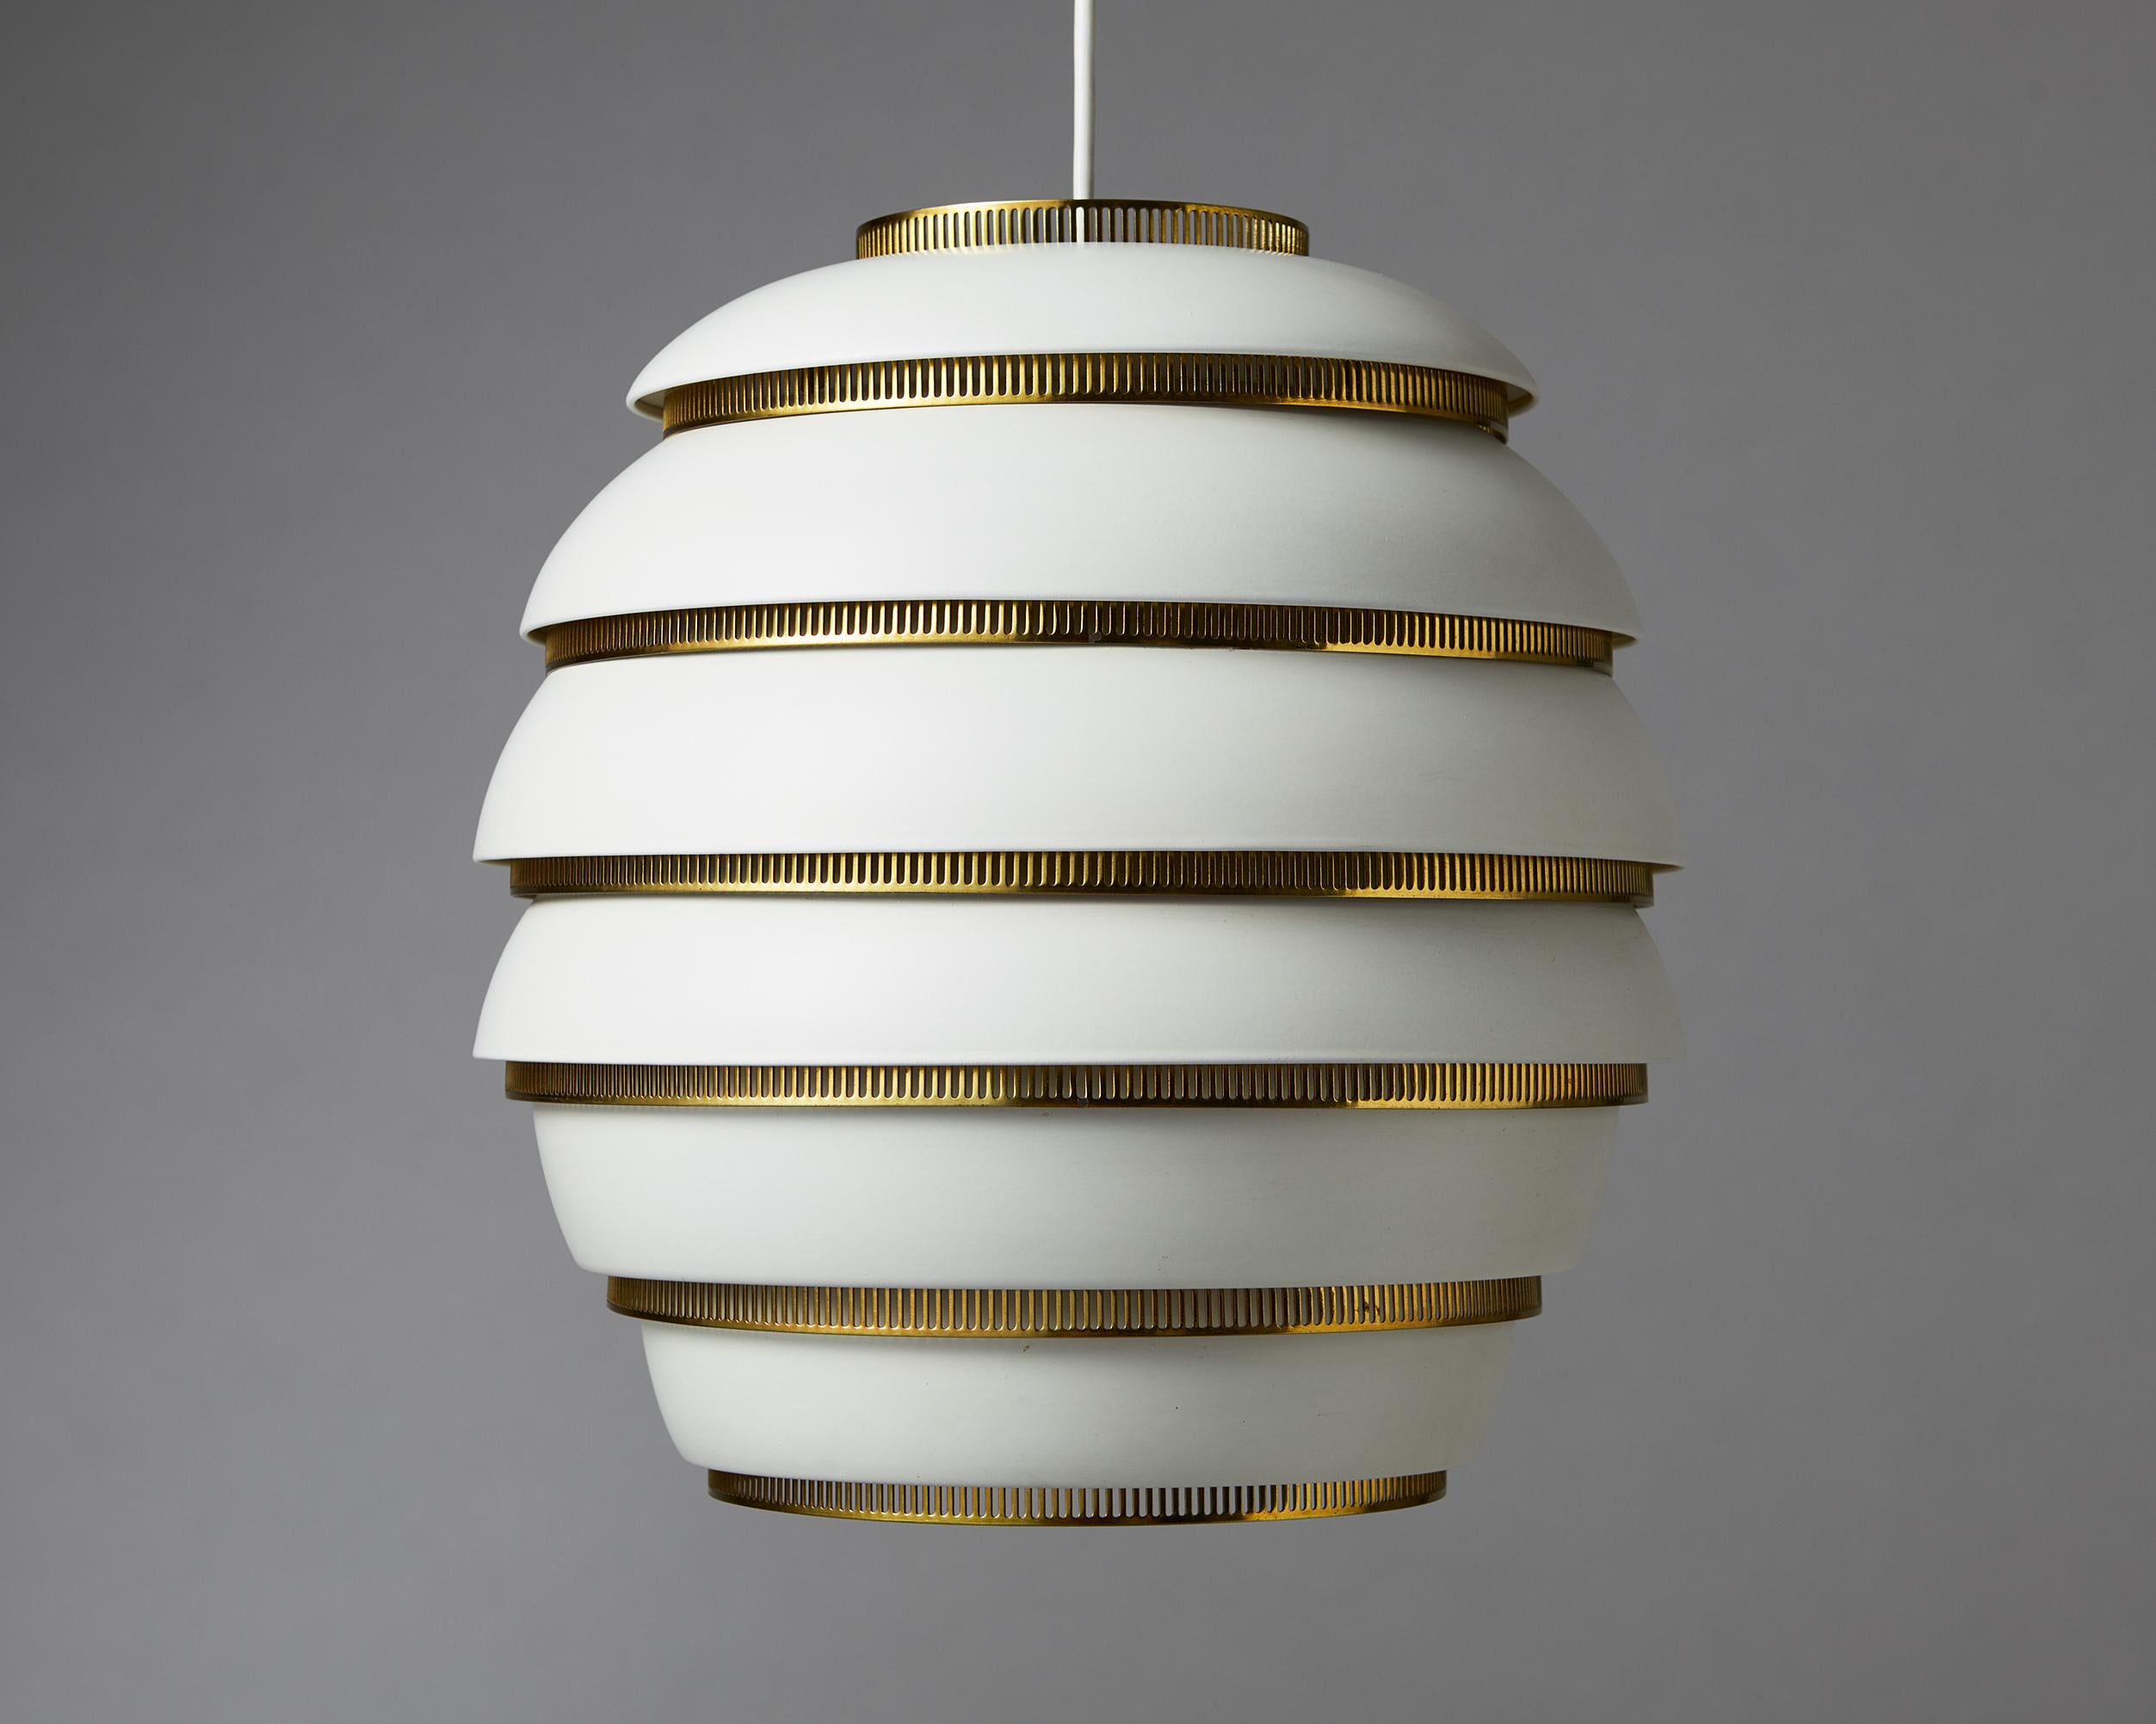 Ceiling lamp model A332 “Beehive” designed by Alvar Aalto for Valaistustyo,
Finland, 1953.

Painted aluminium and polished brass.

Early six tier version.

Stamped, 'VAlAISTUSTYO A33 A'

The A331, nicknamed “Beehive,” is one of Alvar Aalto’s most